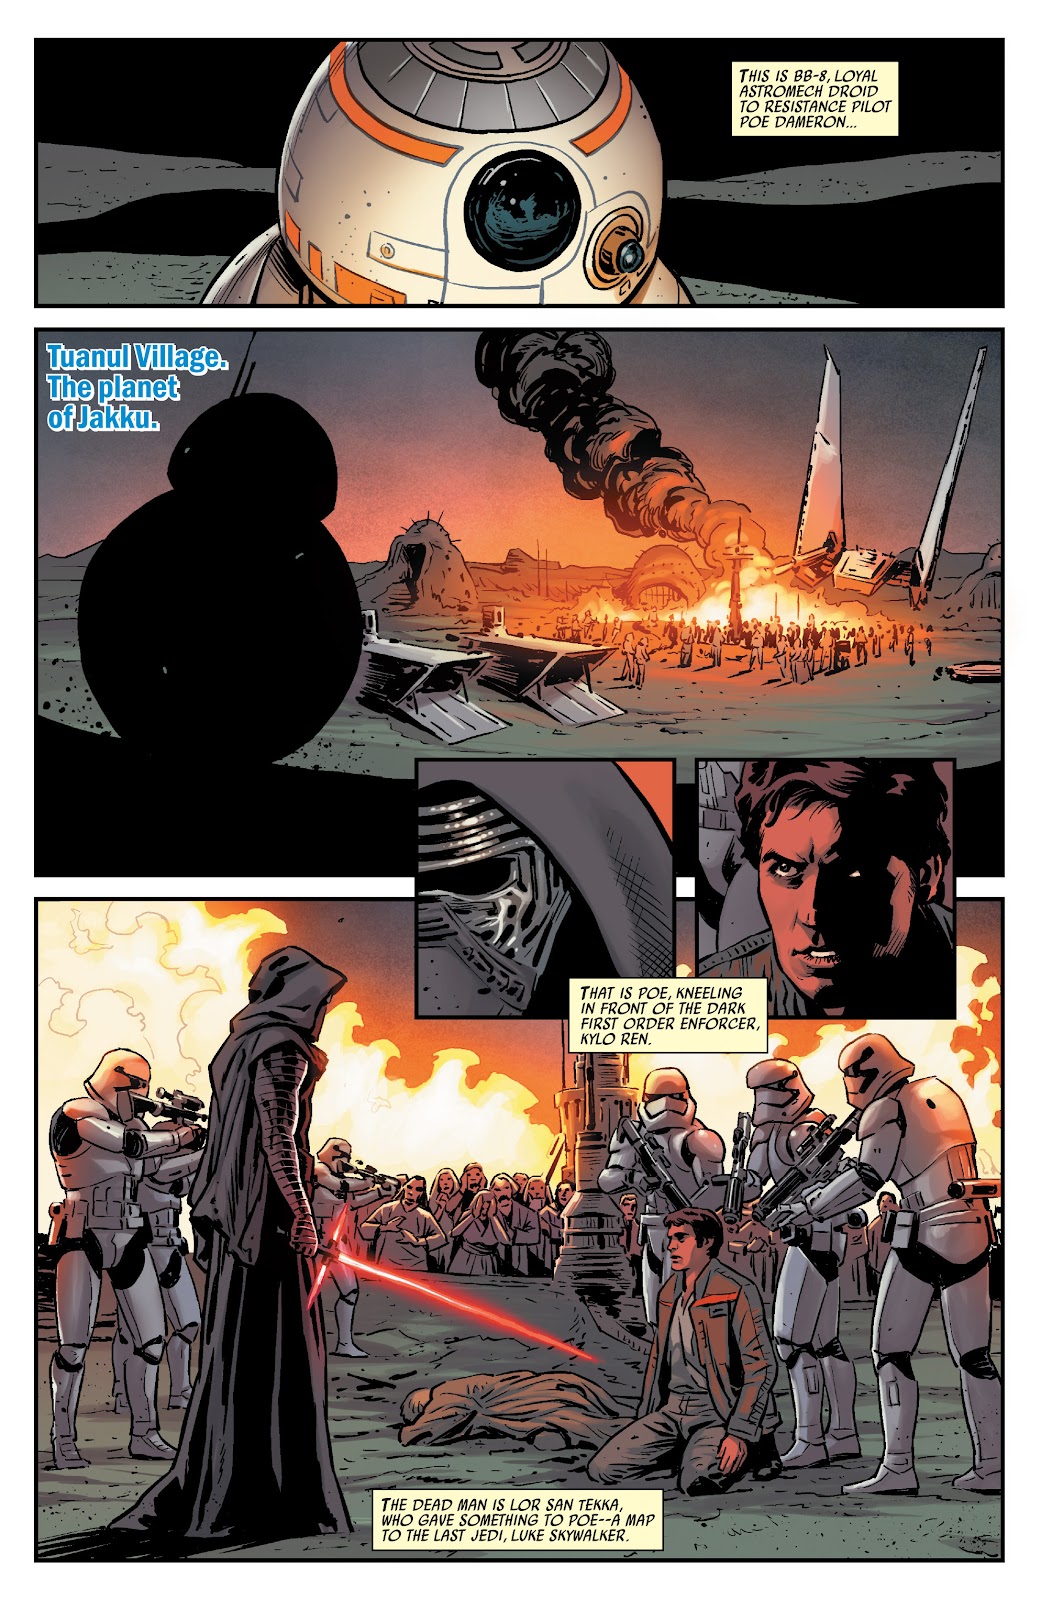 Star Wars: The Force Awakens Adaptation issue 1 - Page 13